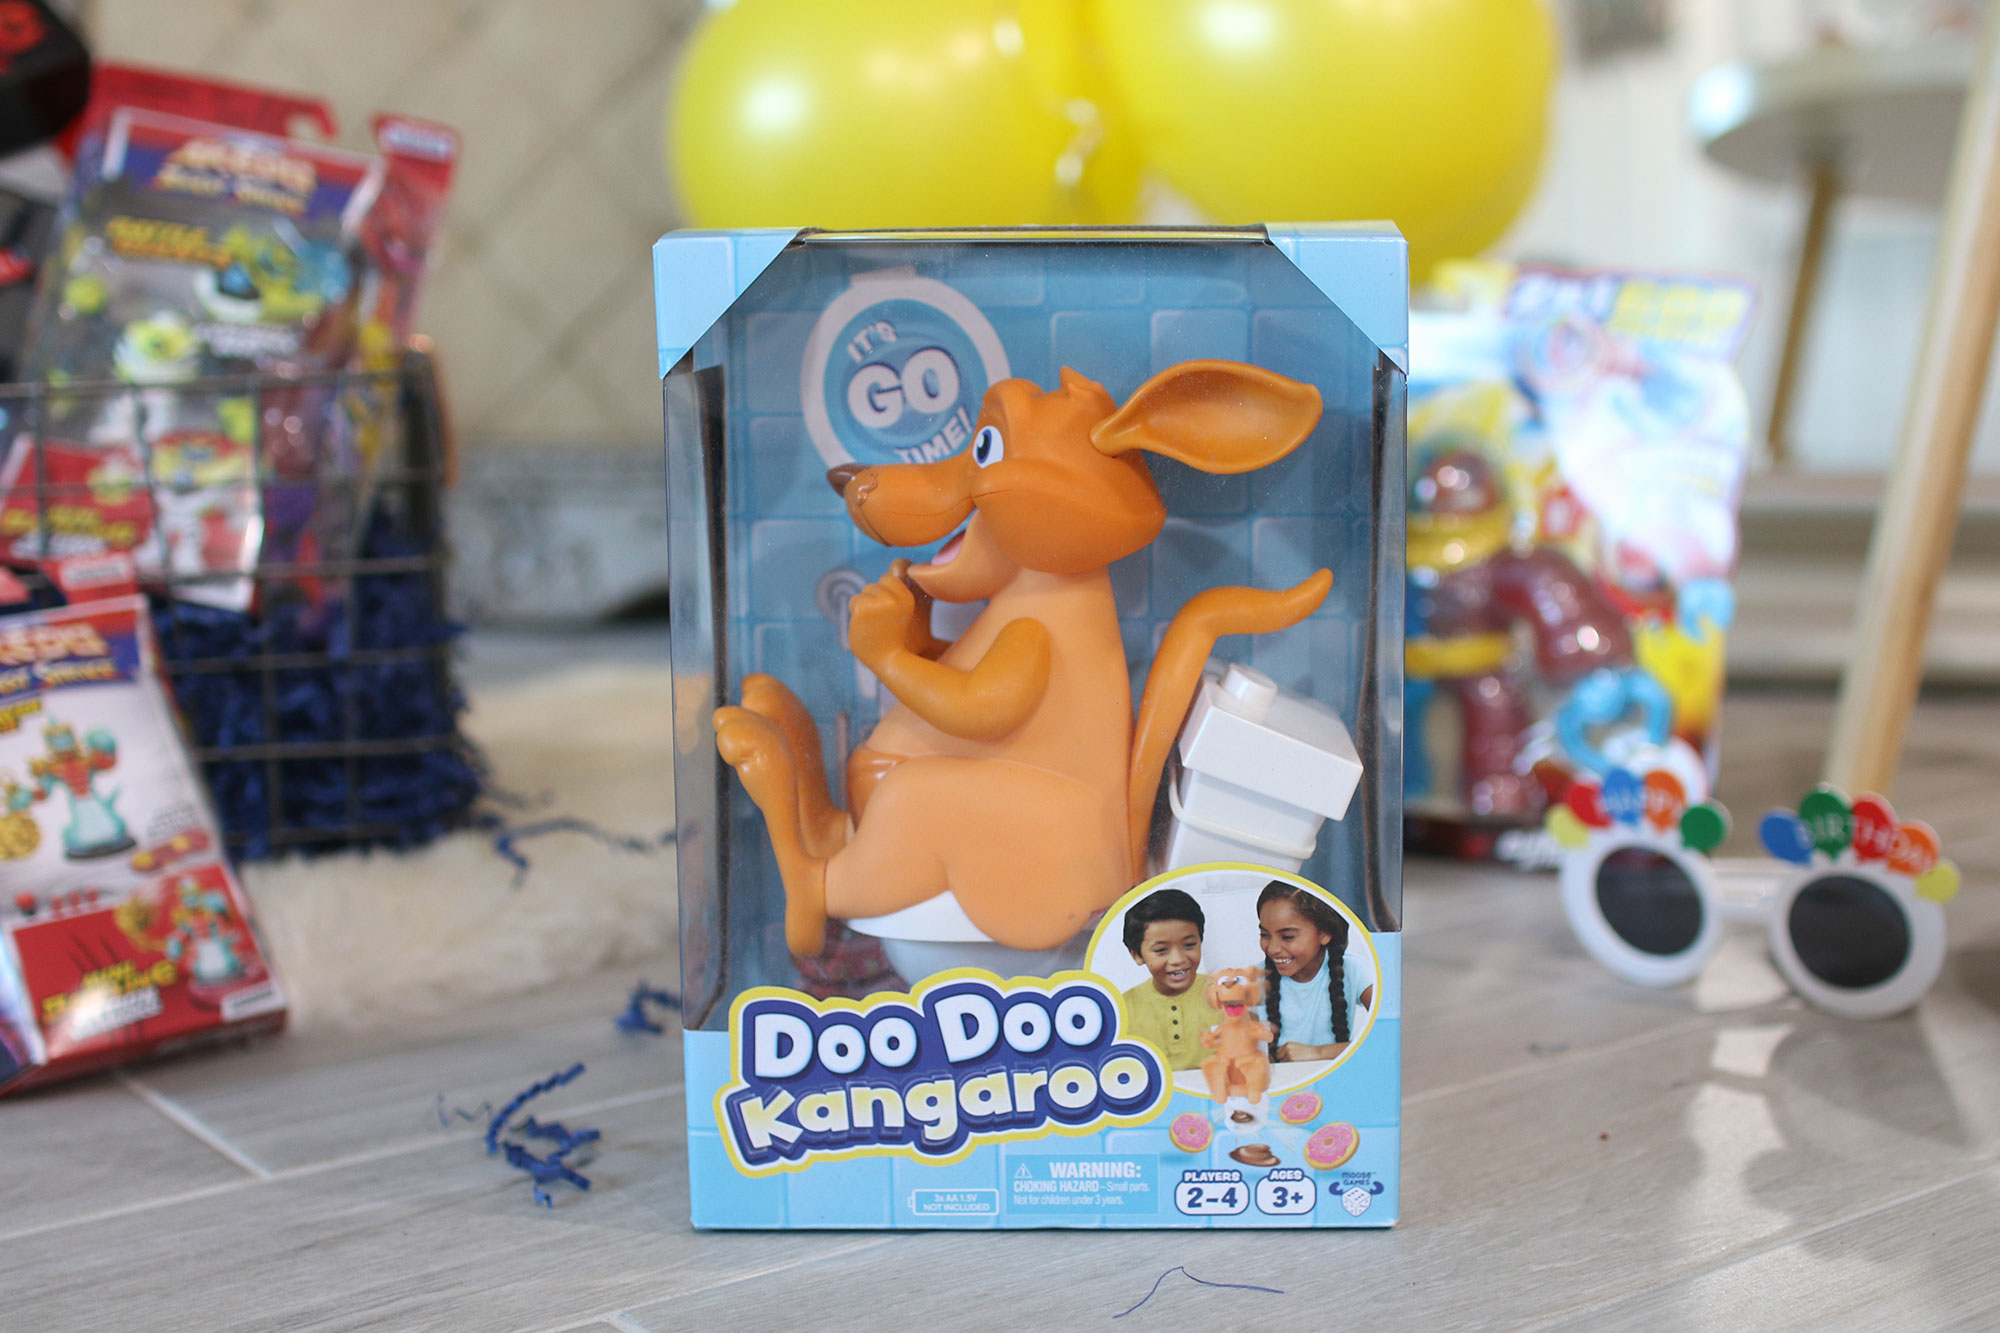 BABBLEBOXX, Gift Guide, Gift Ideas, Gift for Boys, Holiday Shopping, Holiday Gifts, Toy Review, Toys for Boys, Birthday, Birthday Cake, Birthday Cupcakes, Birthday Celebration, Doo Doo Kangaroo